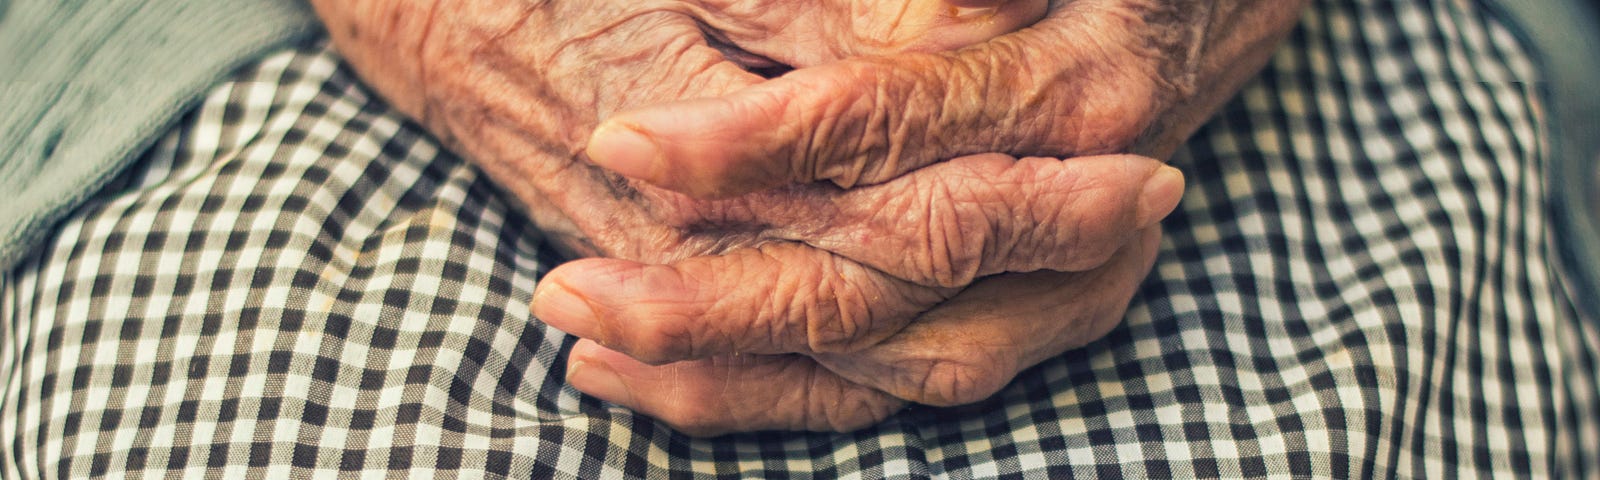 picture of an old woman’s hands folded in her lap